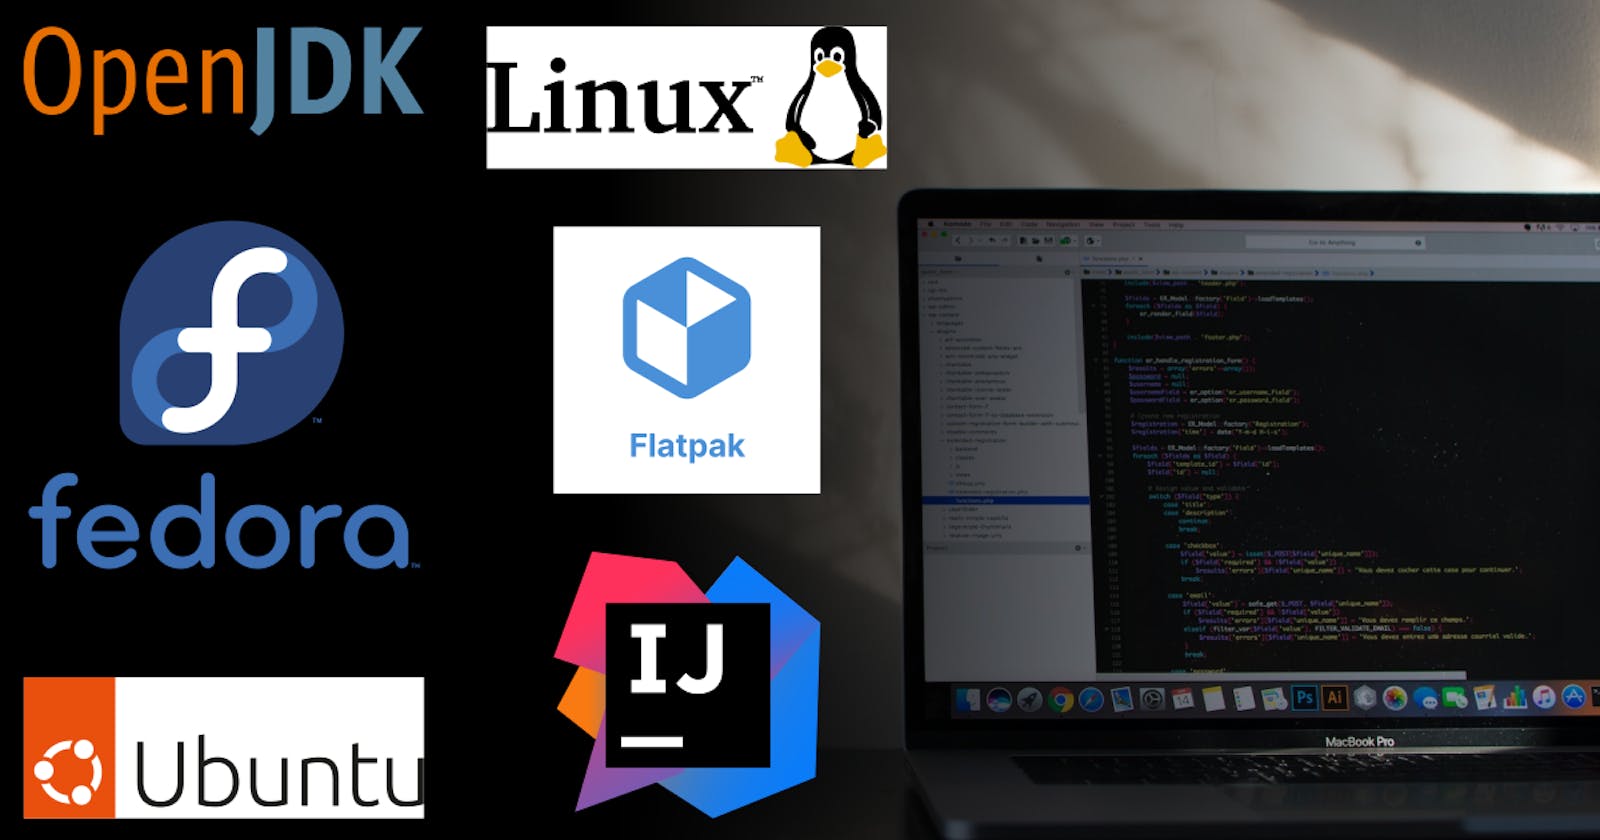 How to install, add, setup, configure the openjdk17 SDK Extension in IntelliJ-IDEA-Community flatpak application in Linux